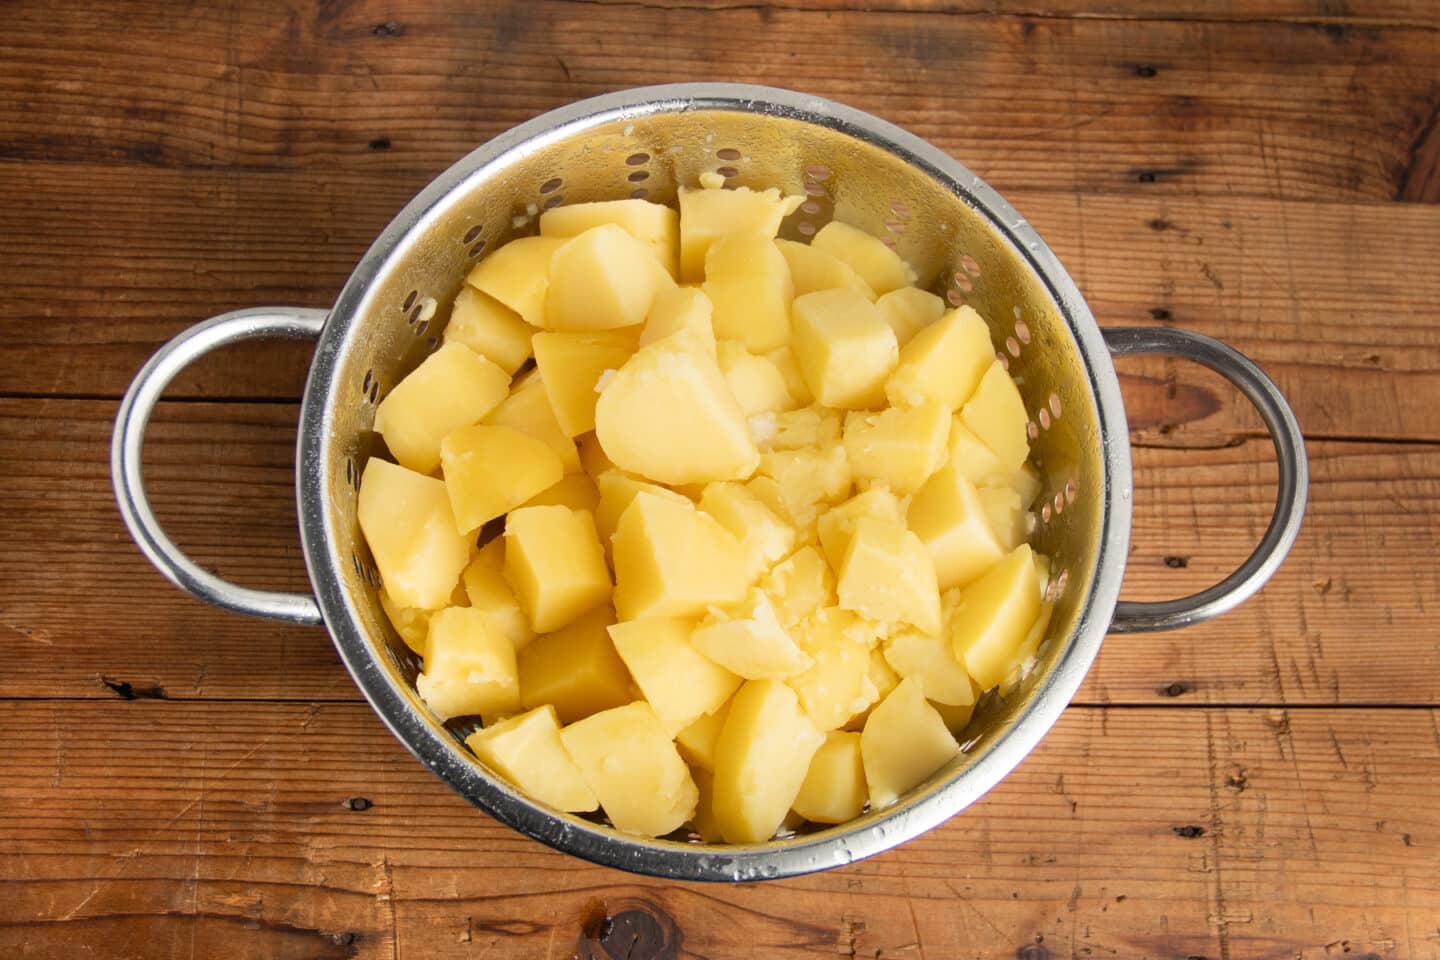 This is a picture of the potatoes being drained in a colander.